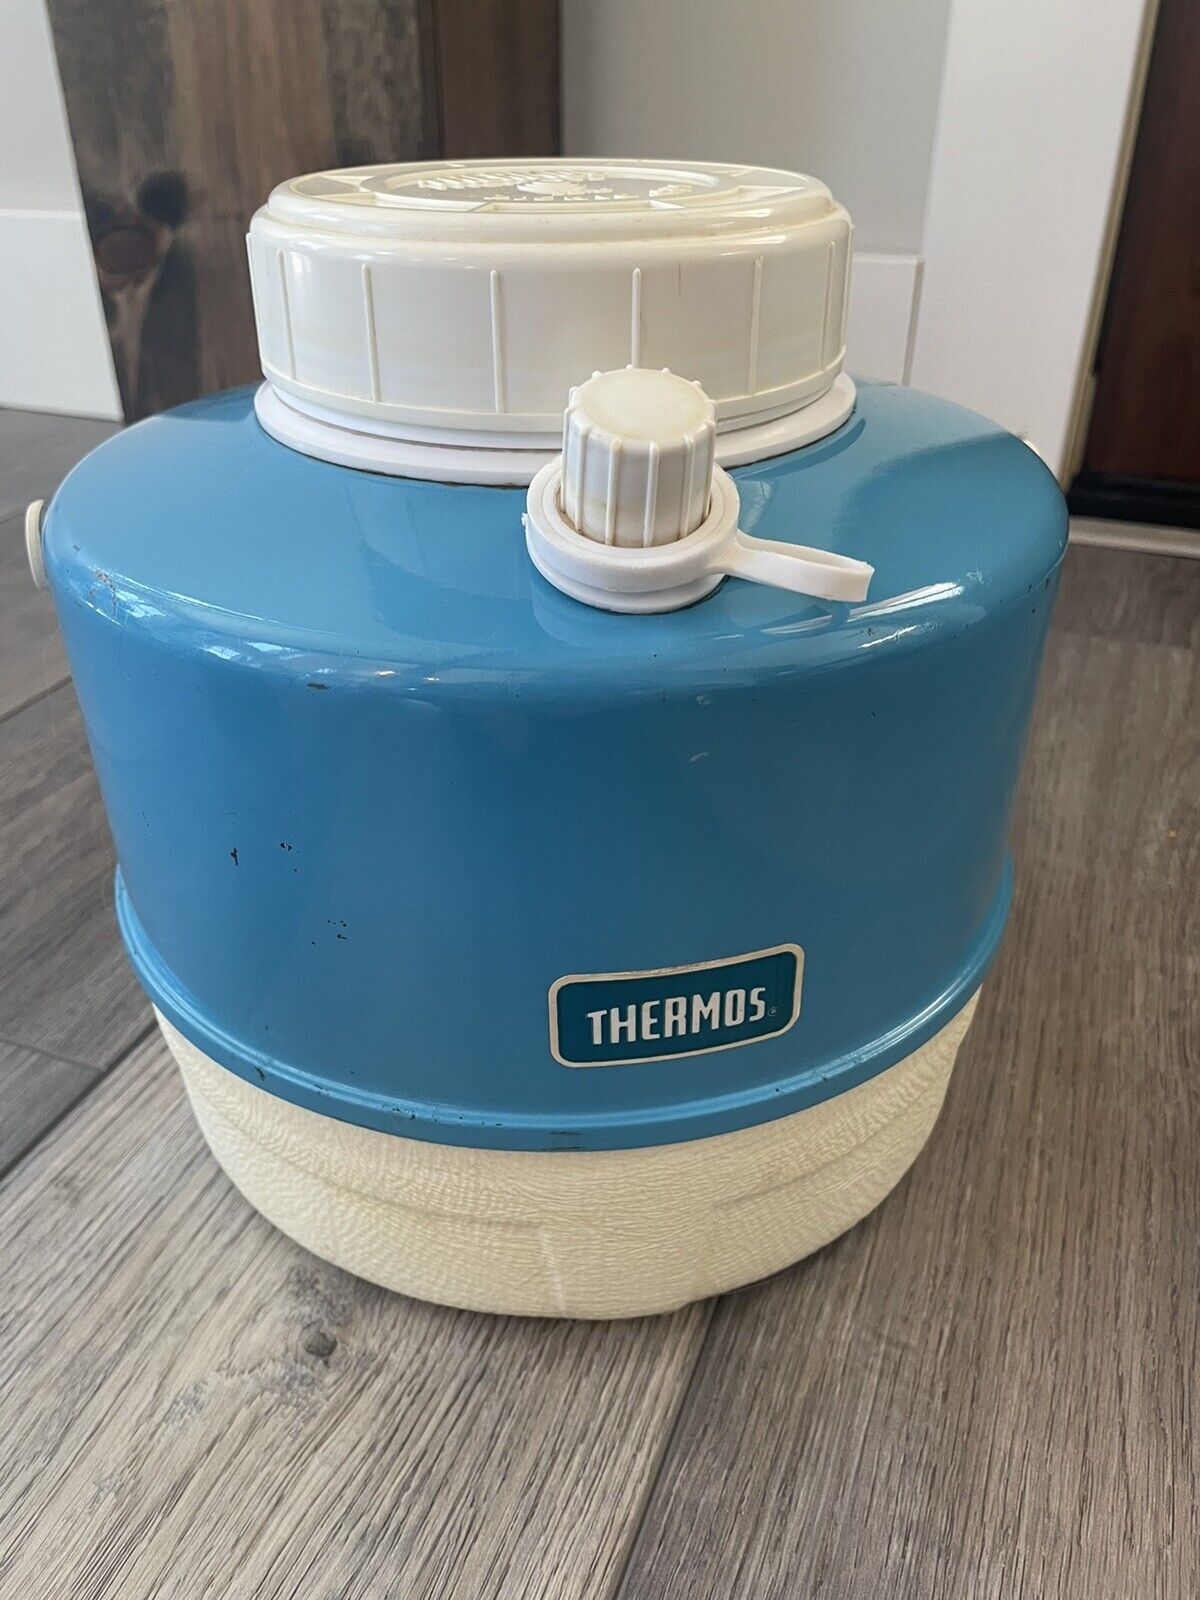 Vintage Thermos Insulated 1 Gallon Jug Teal Blue & White Picnic Camp Collectible